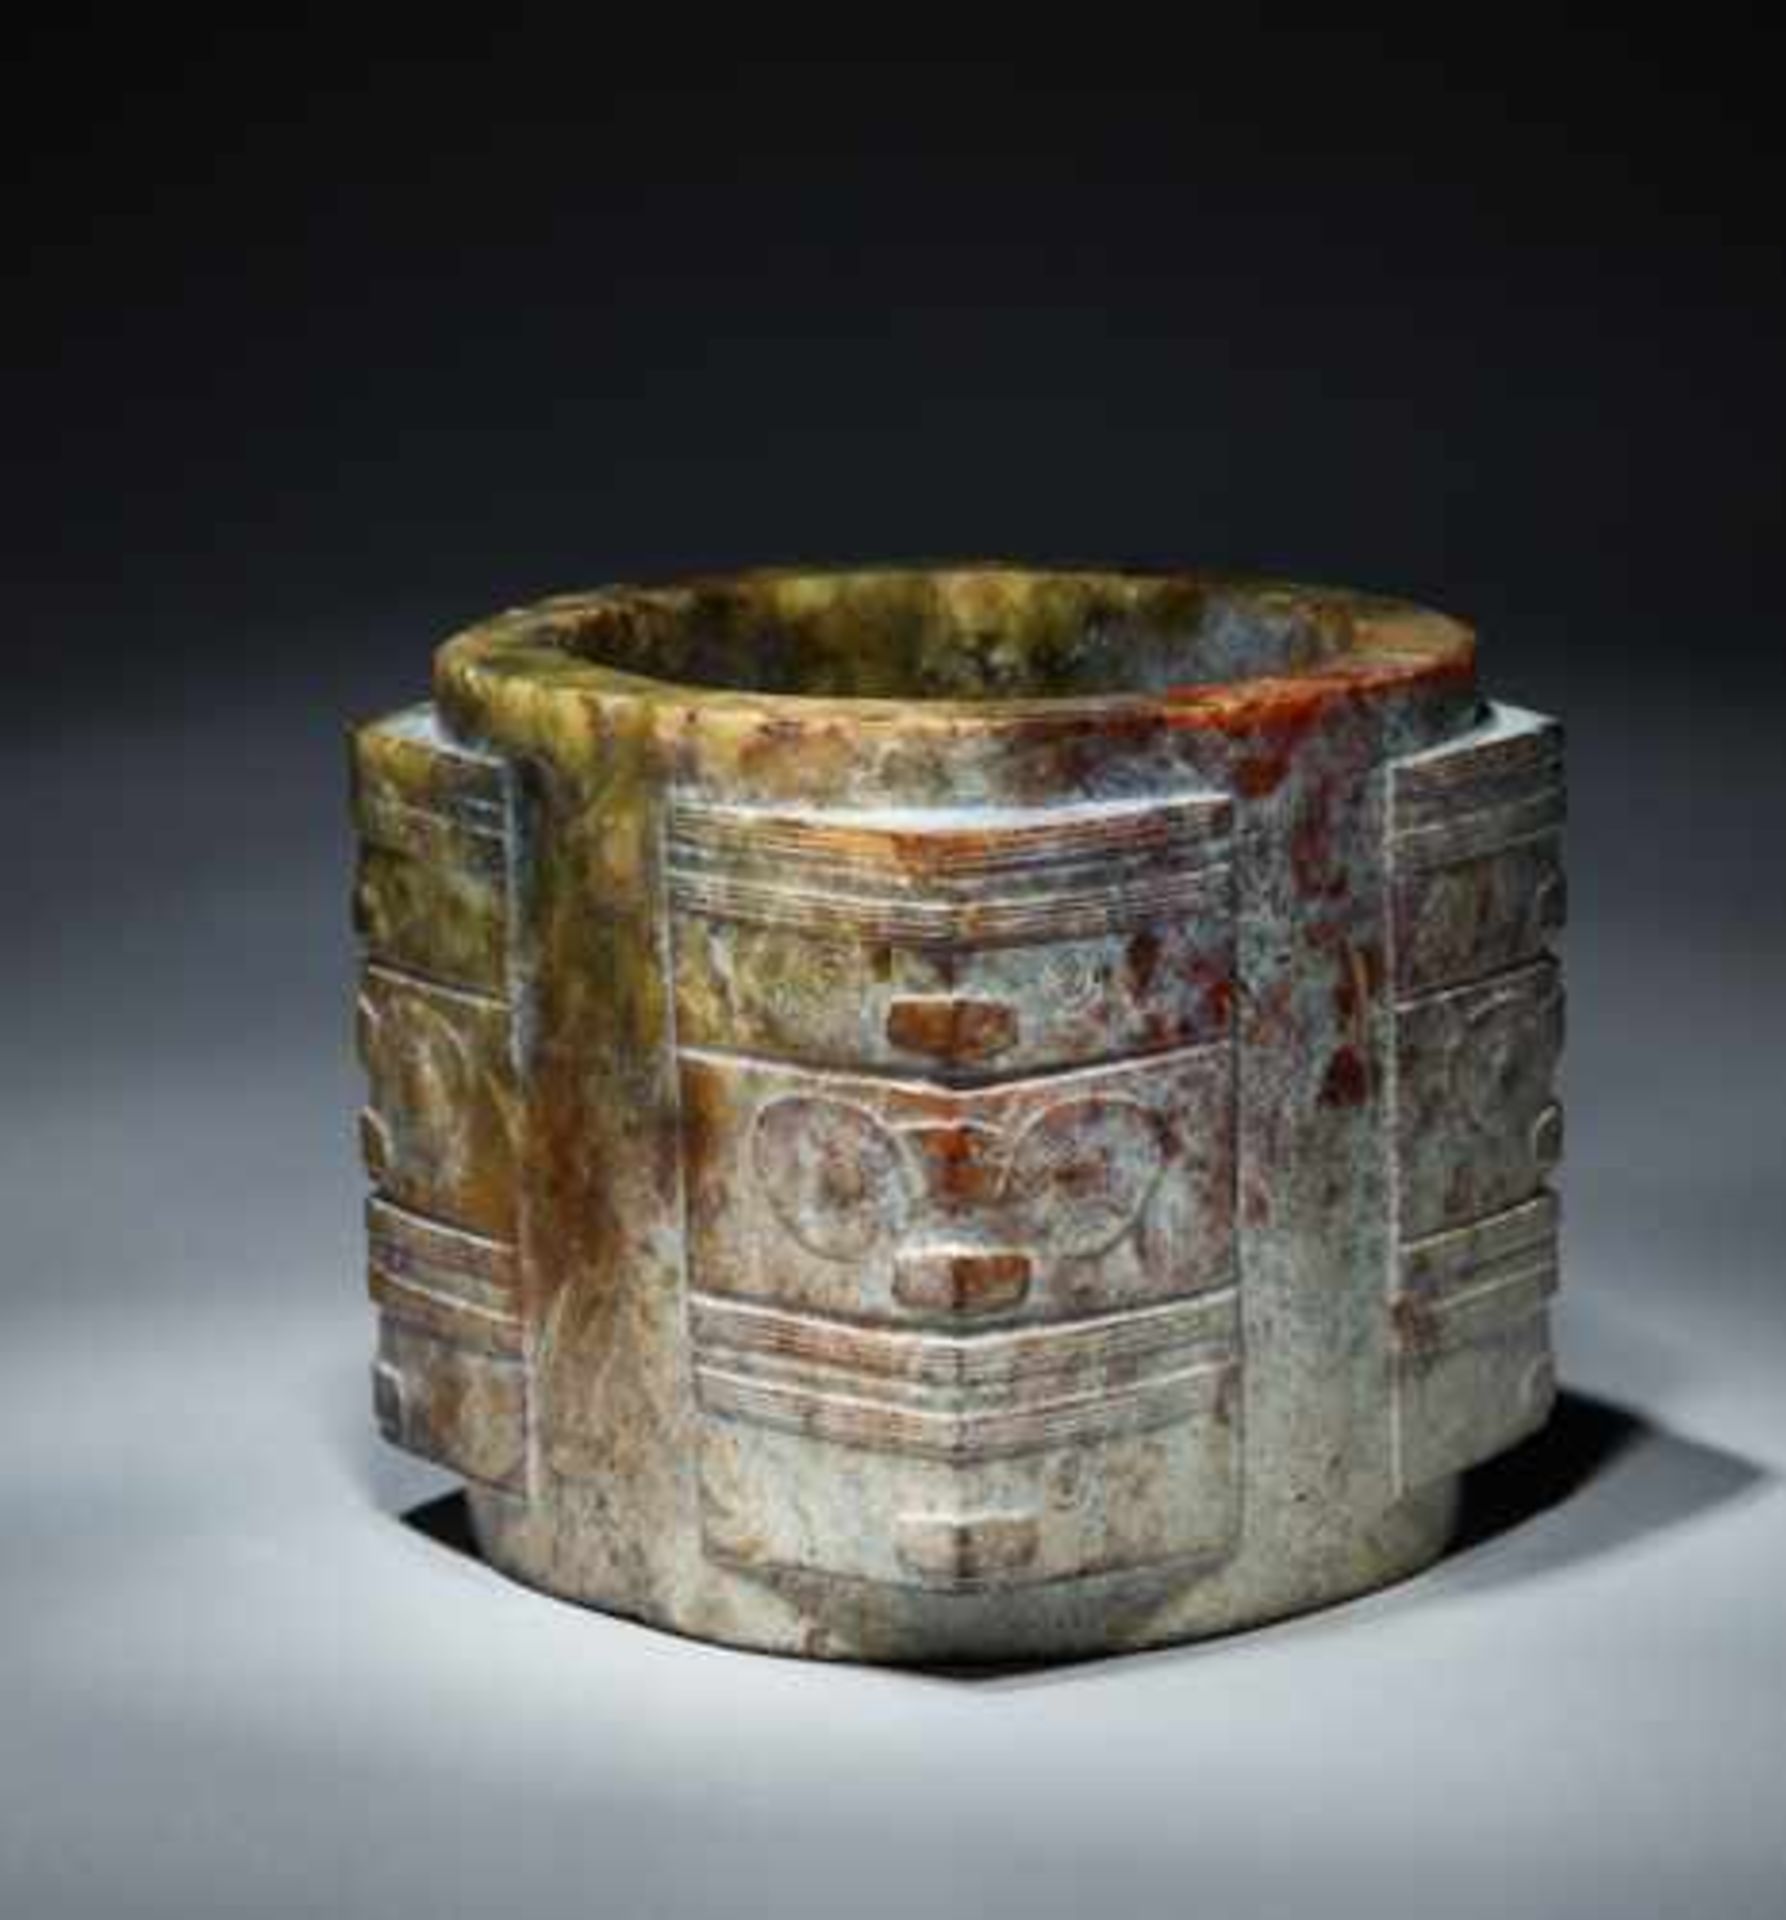 A CLASSIC LIANGZHU CONG WITH CLEARLY DEFINED MASK MOTIFS Jade, China. Late Neolithic period, - Image 5 of 11